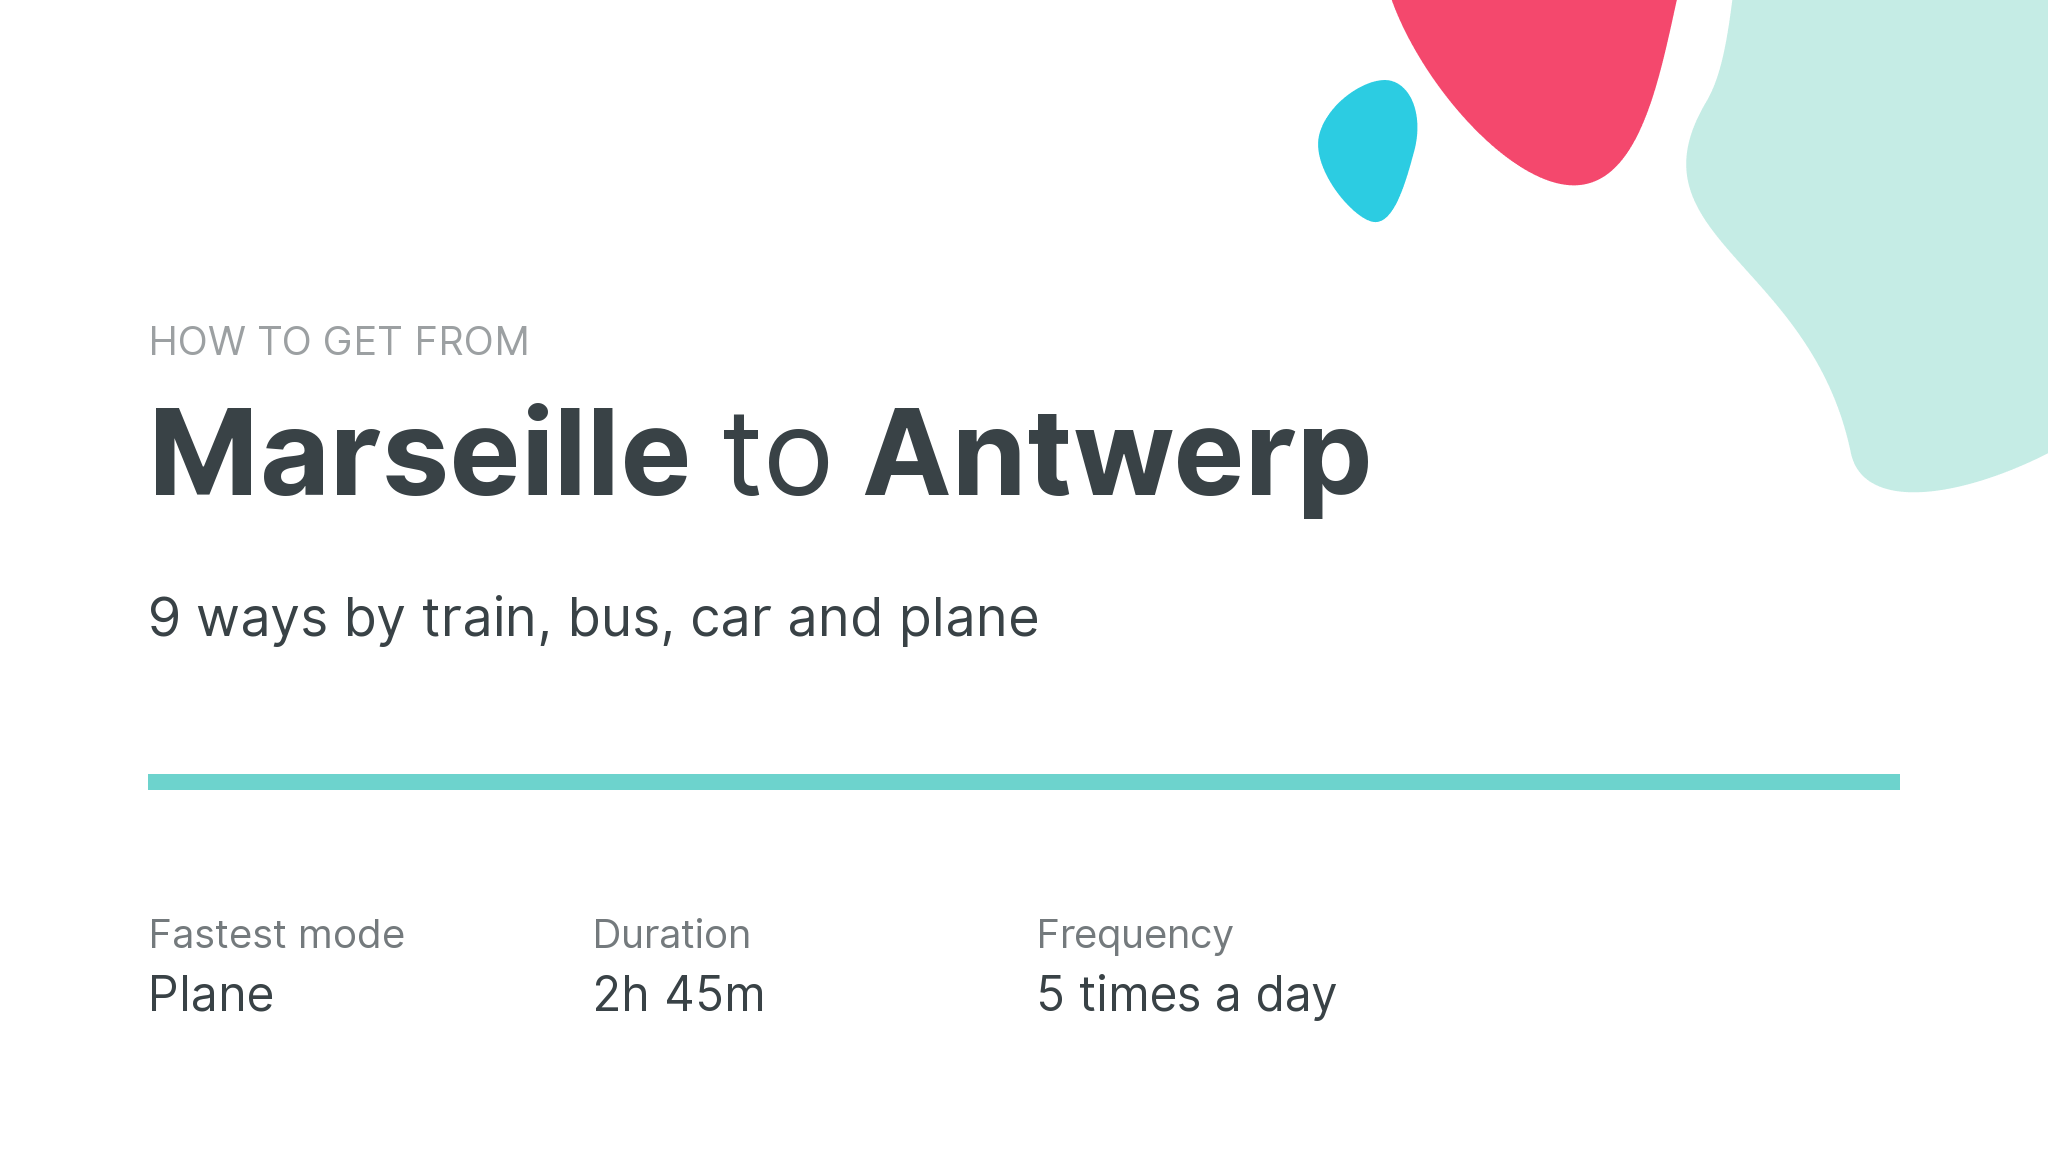 How do I get from Marseille to Antwerp